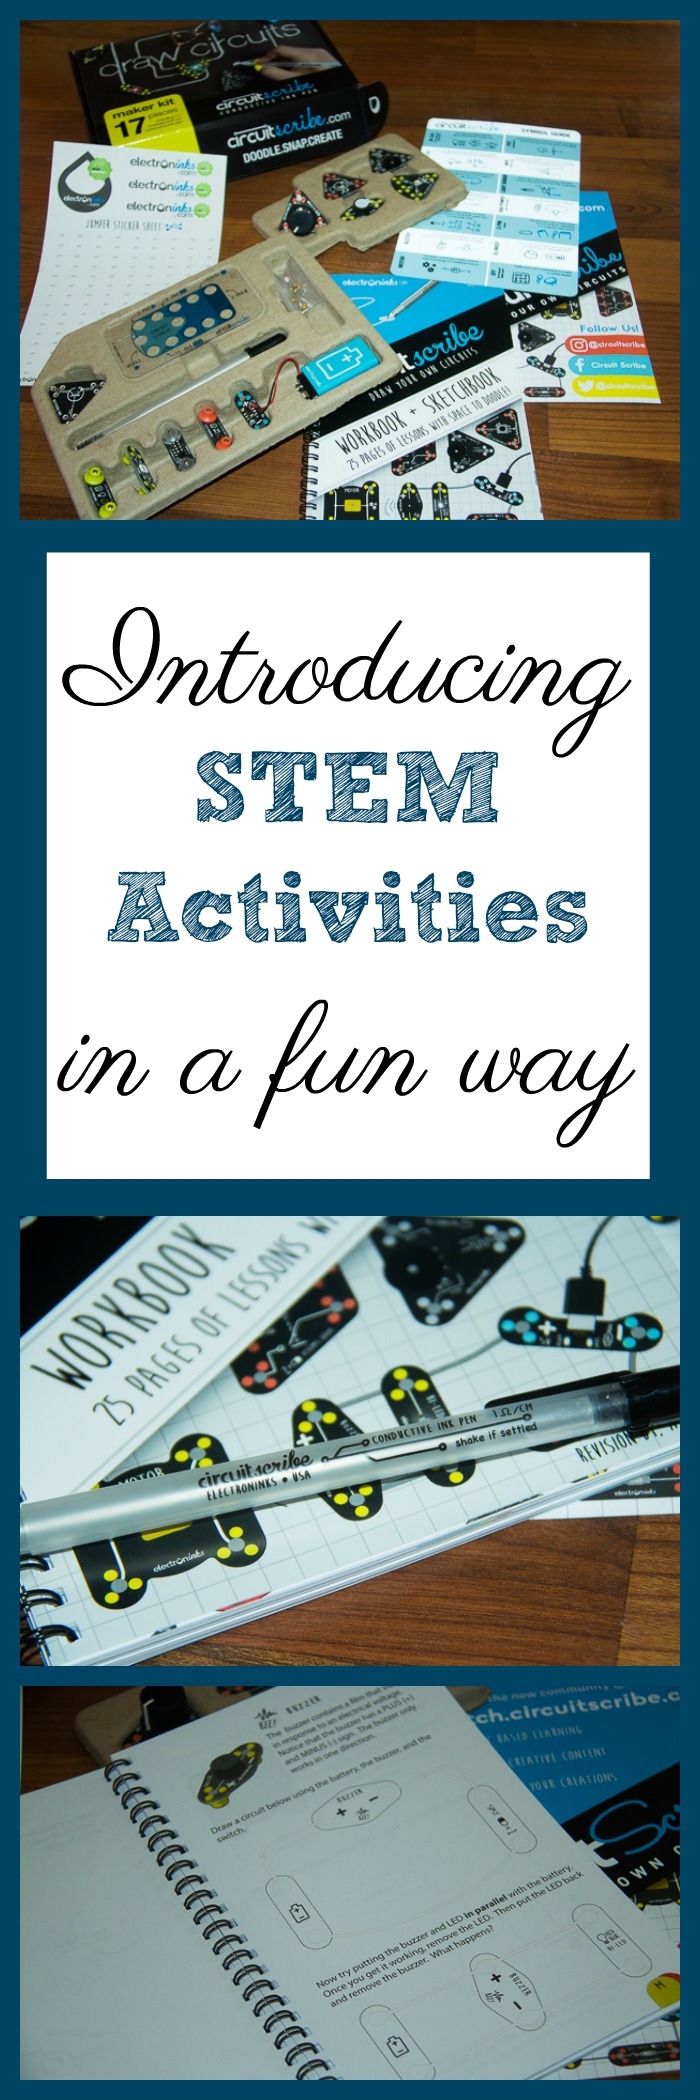 Looking for ways to start Introducing STEM Activities to kids? It can be tricky to get kids into something. Use kits from Circuit Scribe to get started.